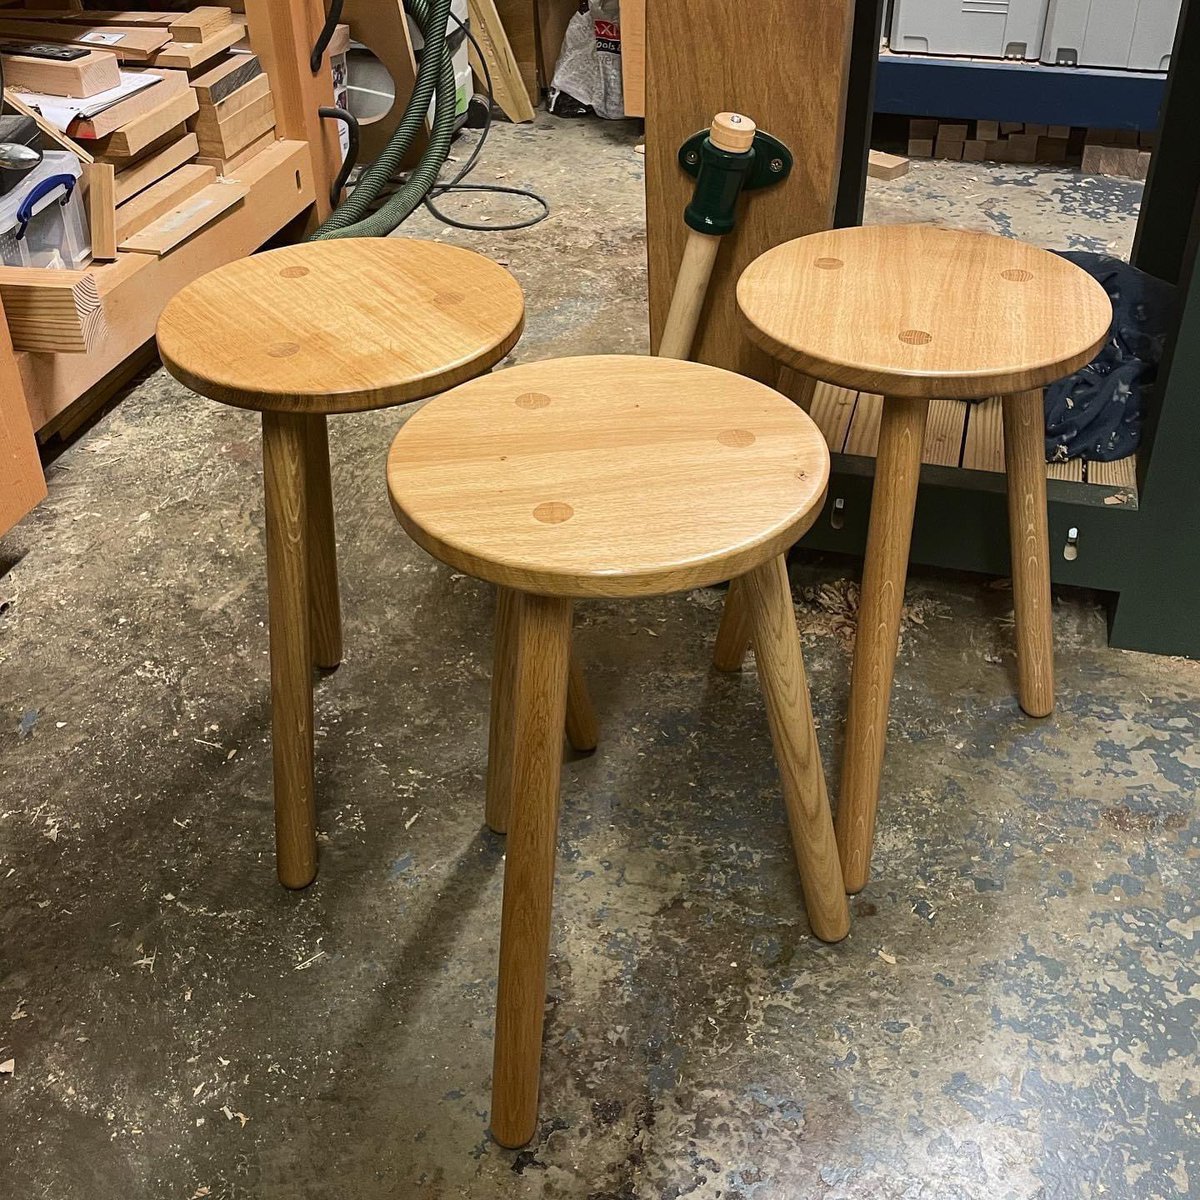 Three 50cm high Stable Stools finished and dispatched to their new homes 🏡
#stablestool #oakstool #makermonday
stephenson-furniture.co.uk/store/p26/Stab…